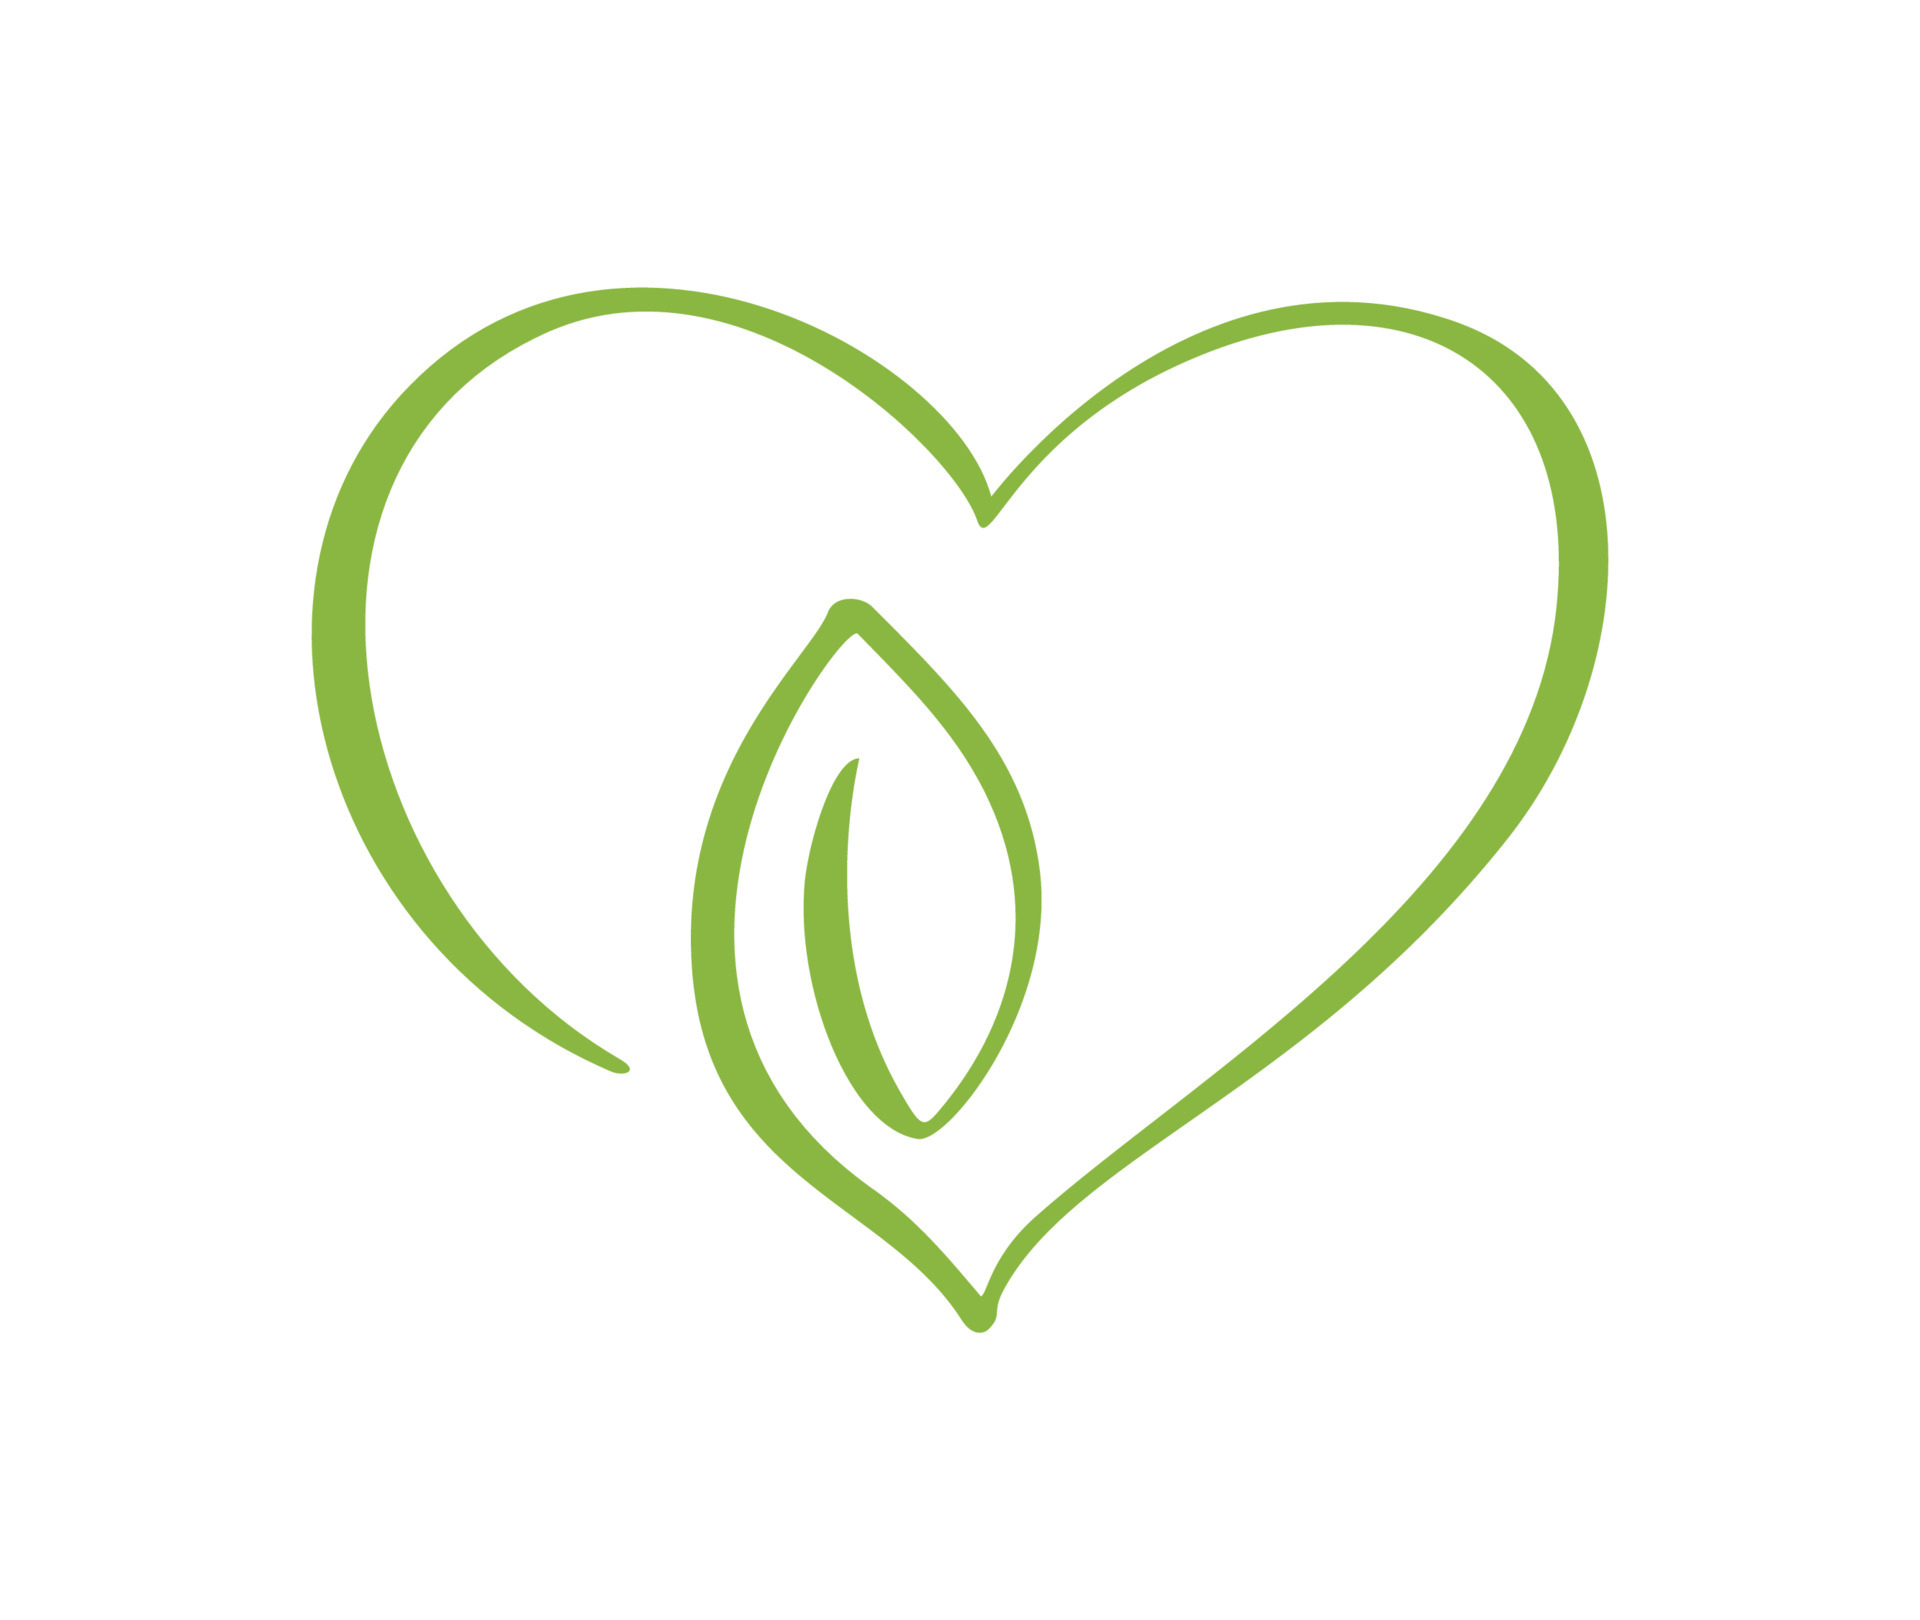 https://static.vecteezy.com/system/resources/previews/005/329/802/original/green-icon-heart-shape-and-leaf-can-be-used-for-eco-vegan-herbal-healthcare-or-nature-care-concept-organic-logo-design-vector.jpg